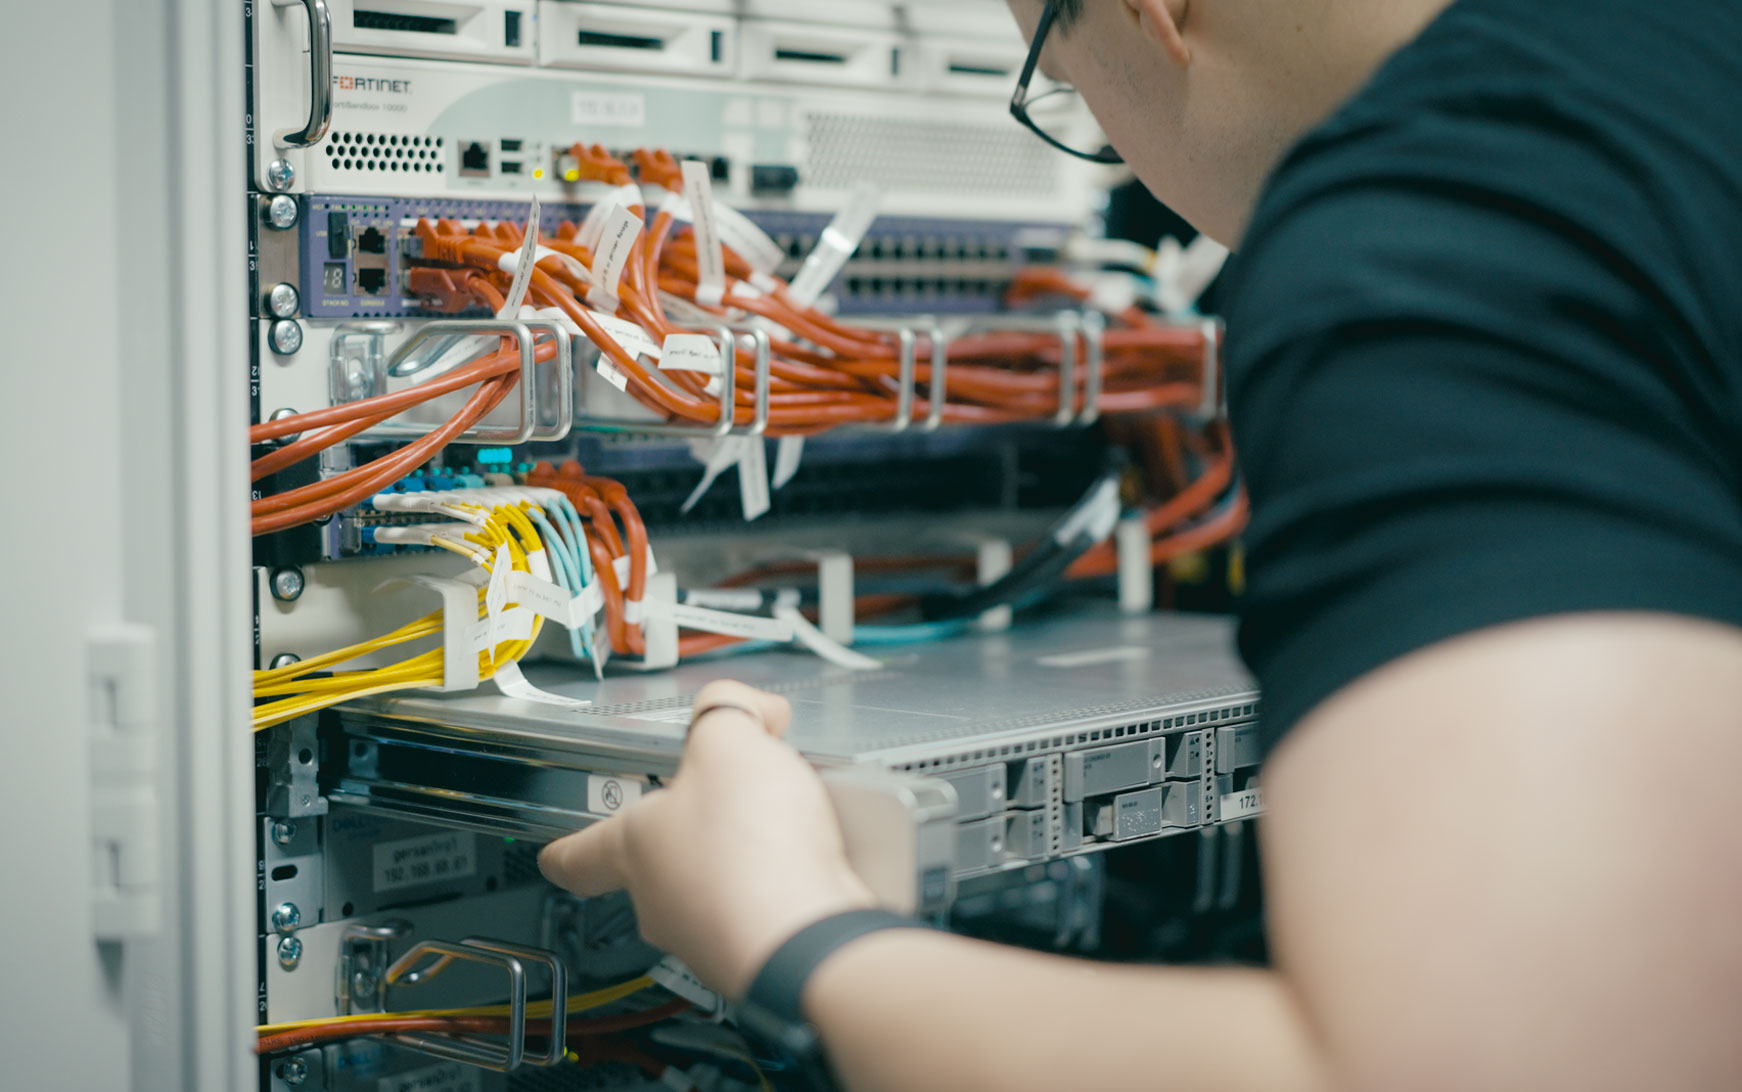 As a system administrator working in system integration at seele, your tasks include planning and configuring IT systems and setting up networks and client-server systems in cooperation with our hardware experts. 